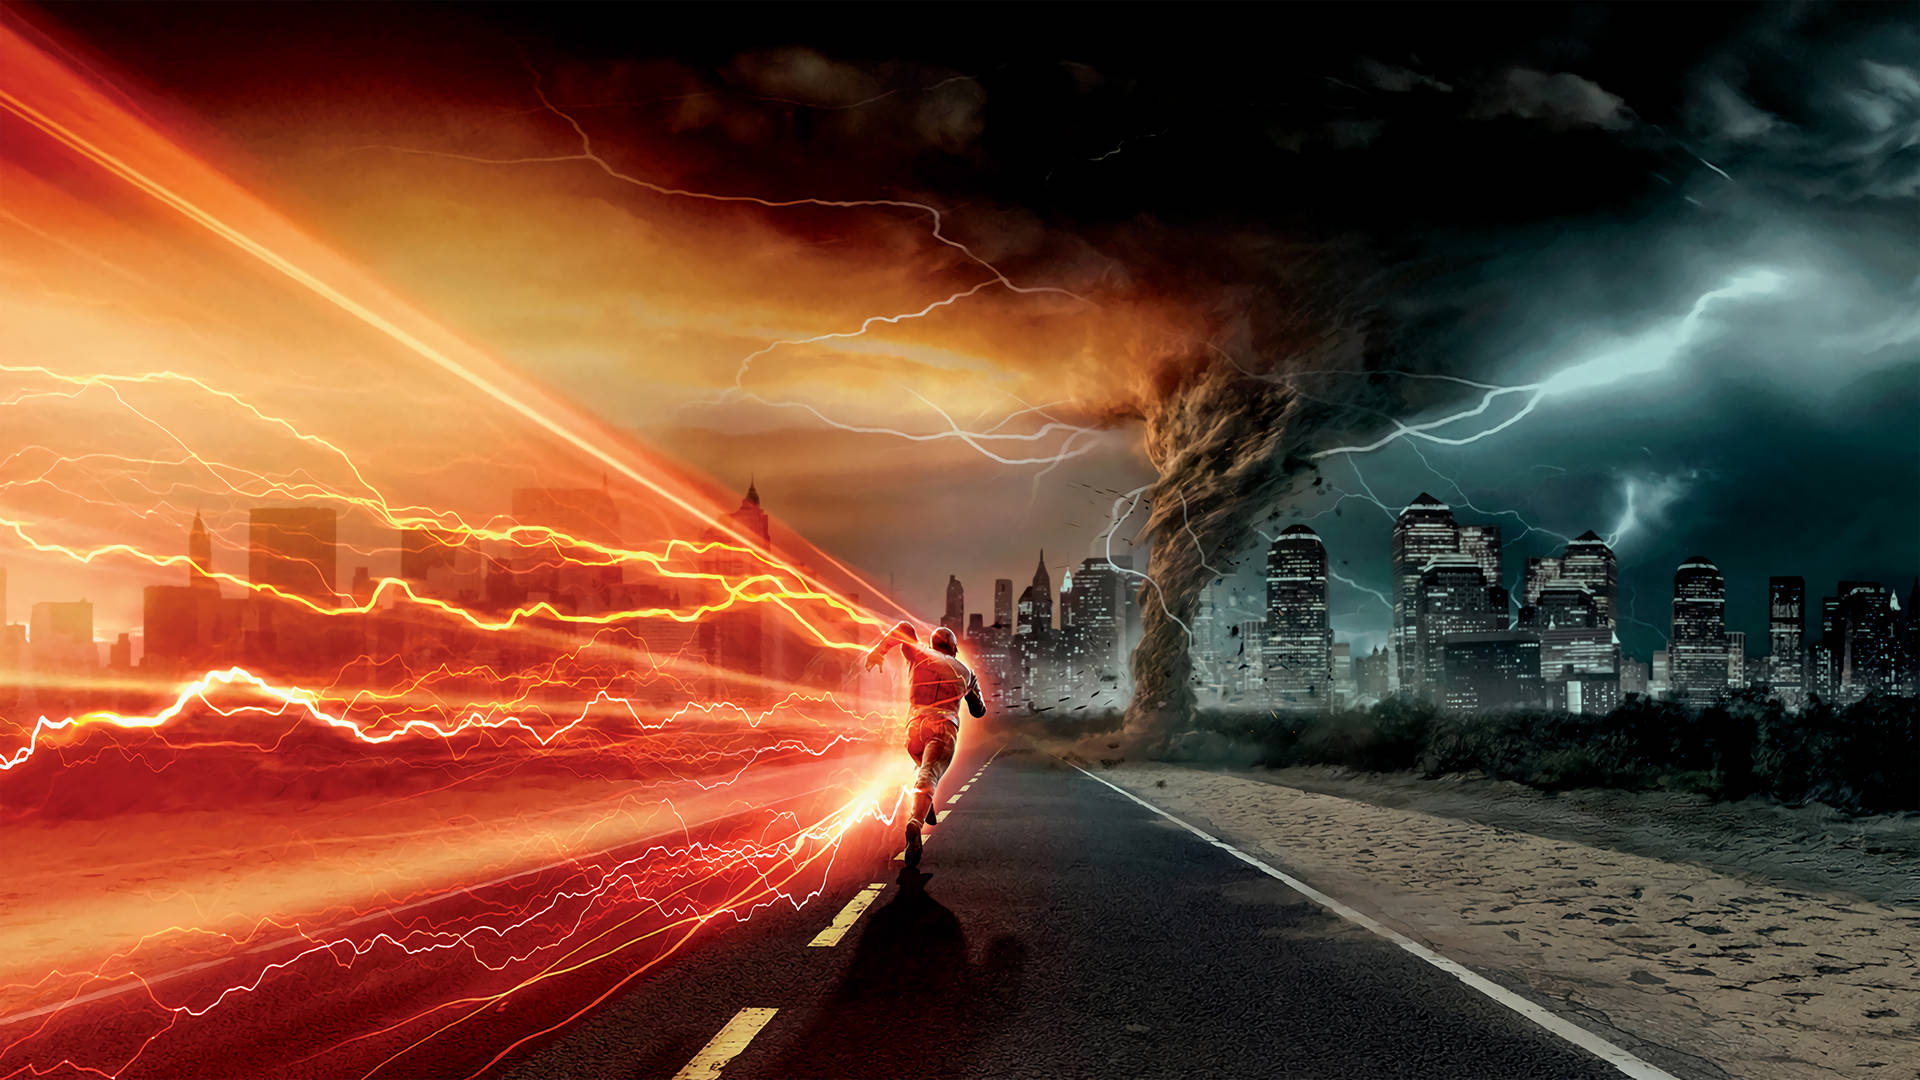 The Flash Running In Road